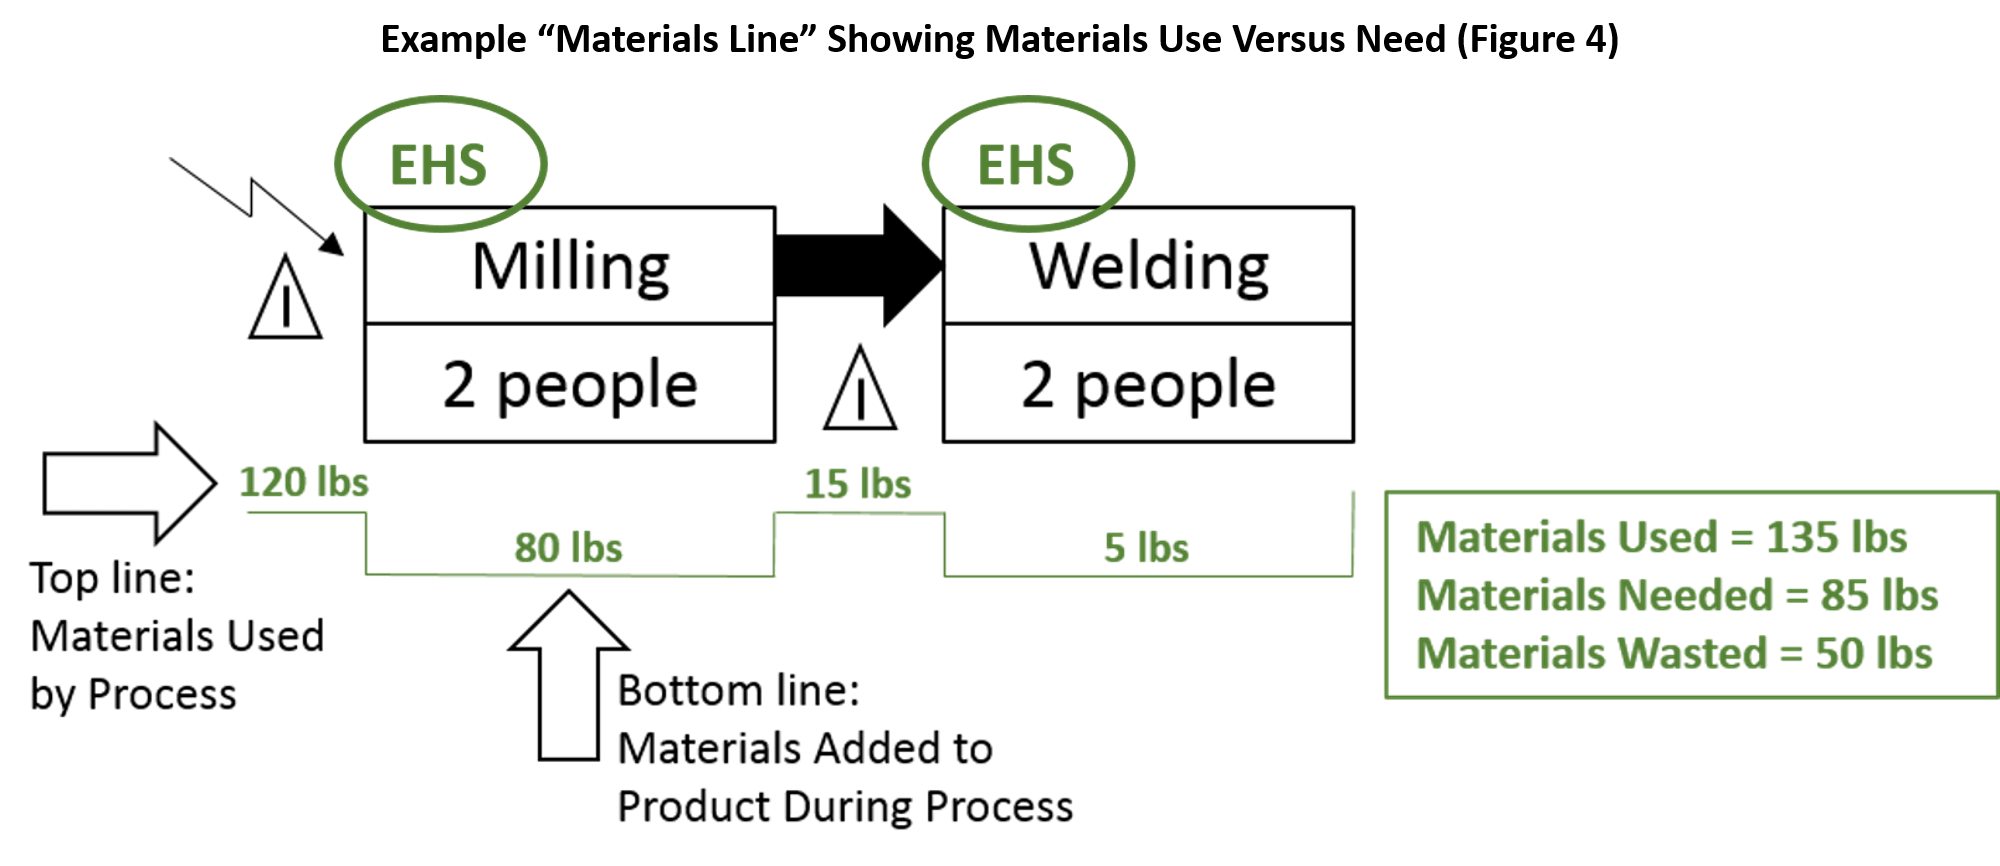 Example Materials Line Showing Materials Use Versus Need (Figure 4)